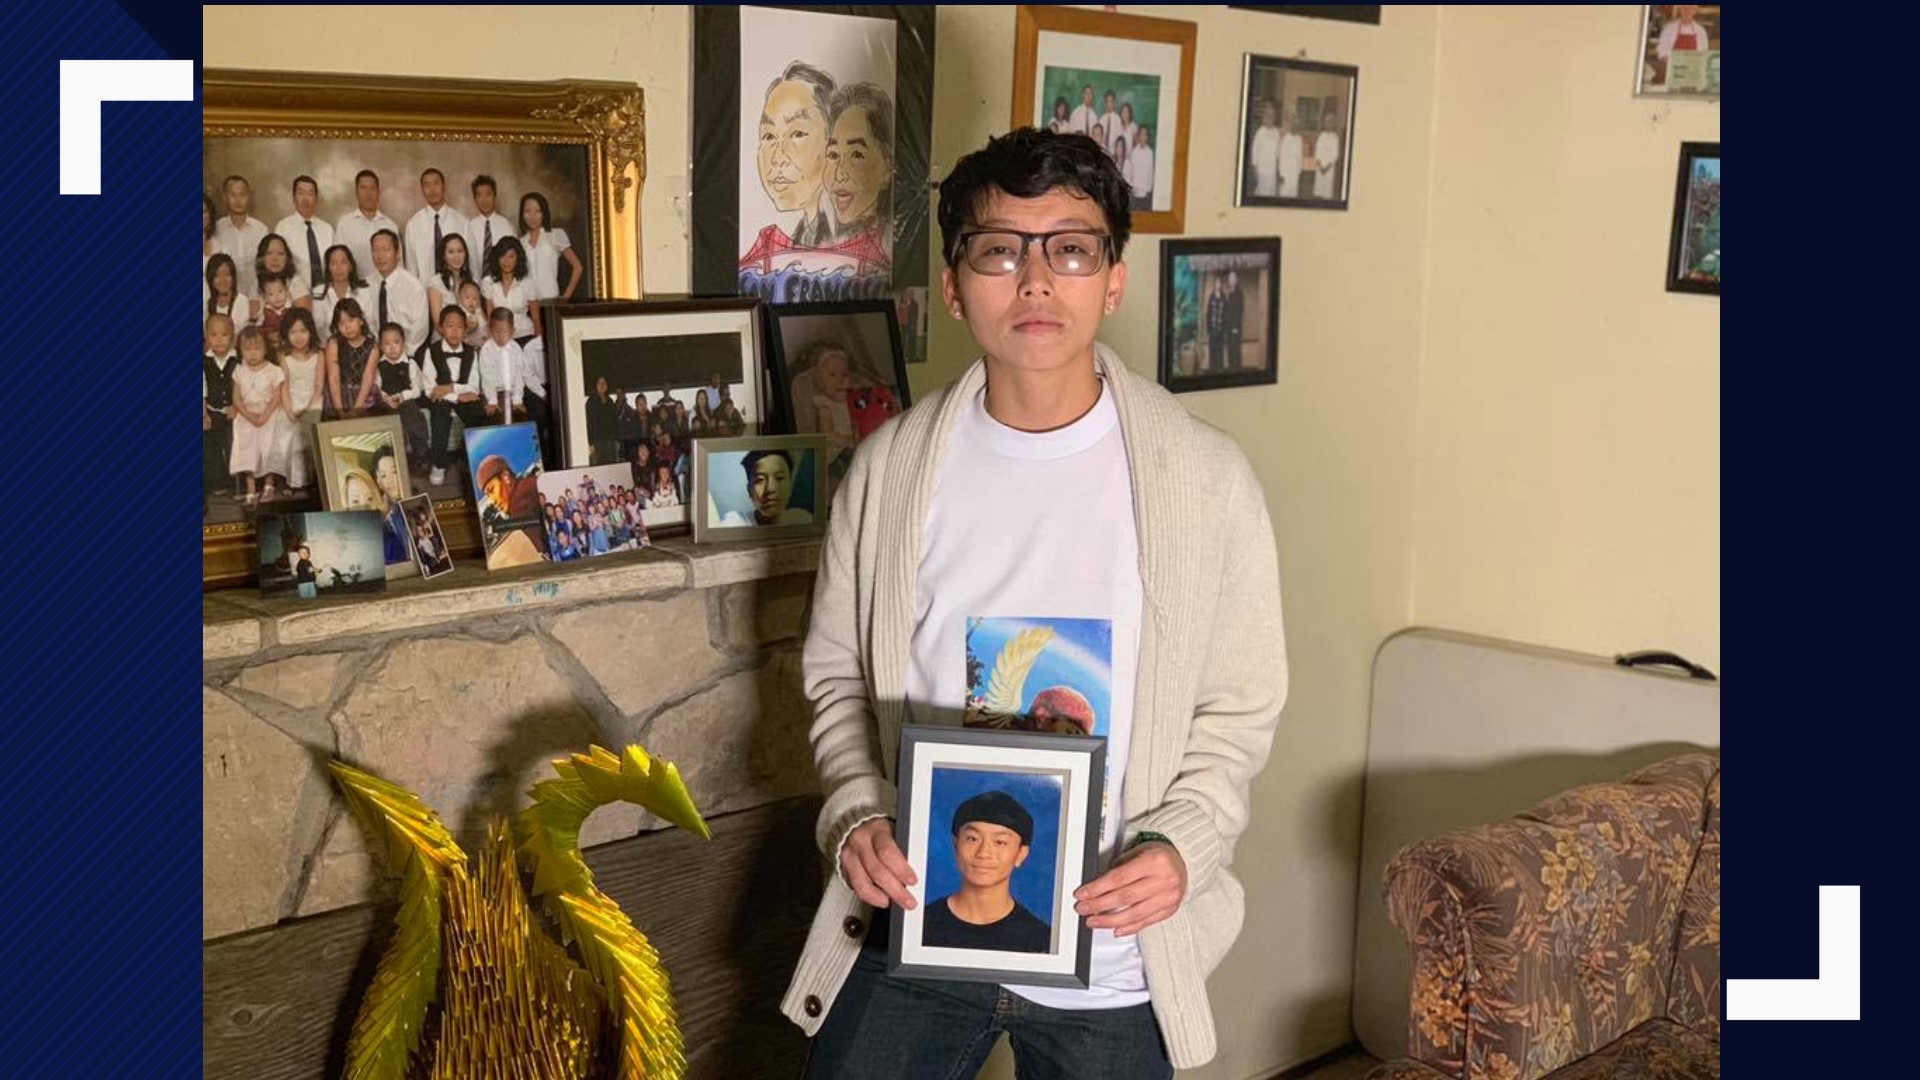 The family of 15-year-old Advan Vang, who was shot to death with his friend in Stockton on Feb. 24, is holding a fundraiser to help pay for funeral expenses.